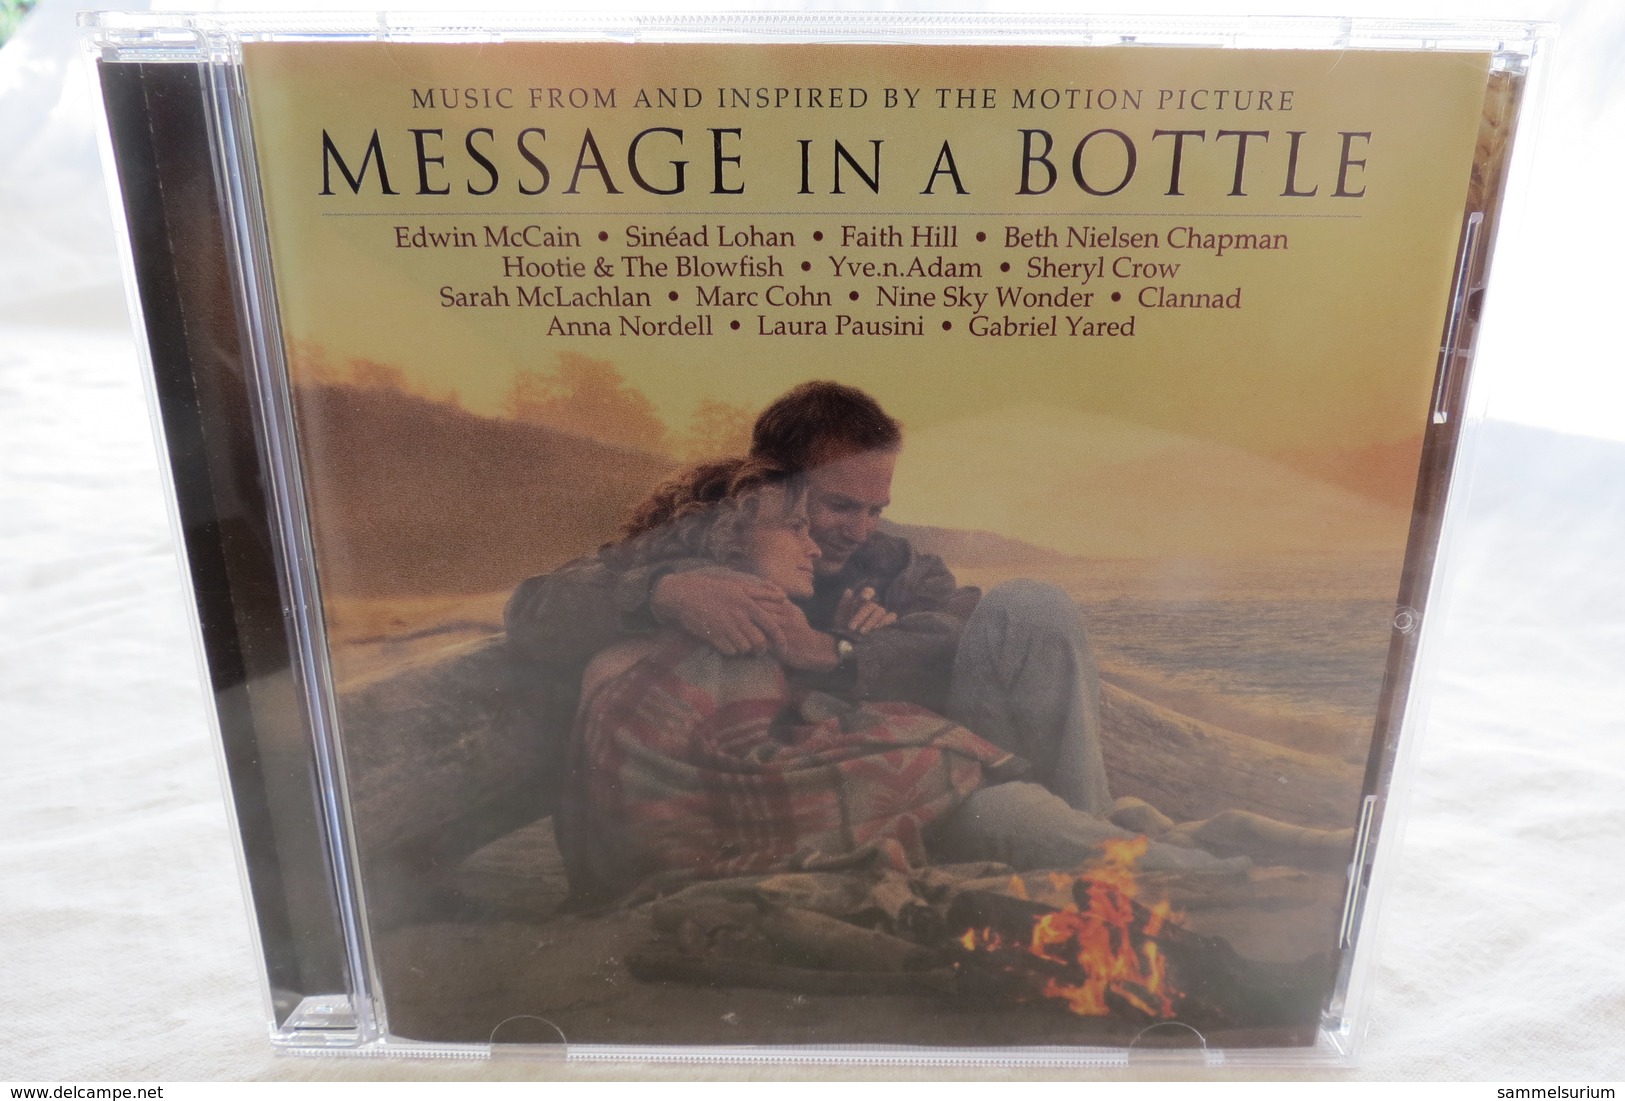 CD "Message In A Bottle" Music From And Inspired By The Motion Picture - Soundtracks, Film Music